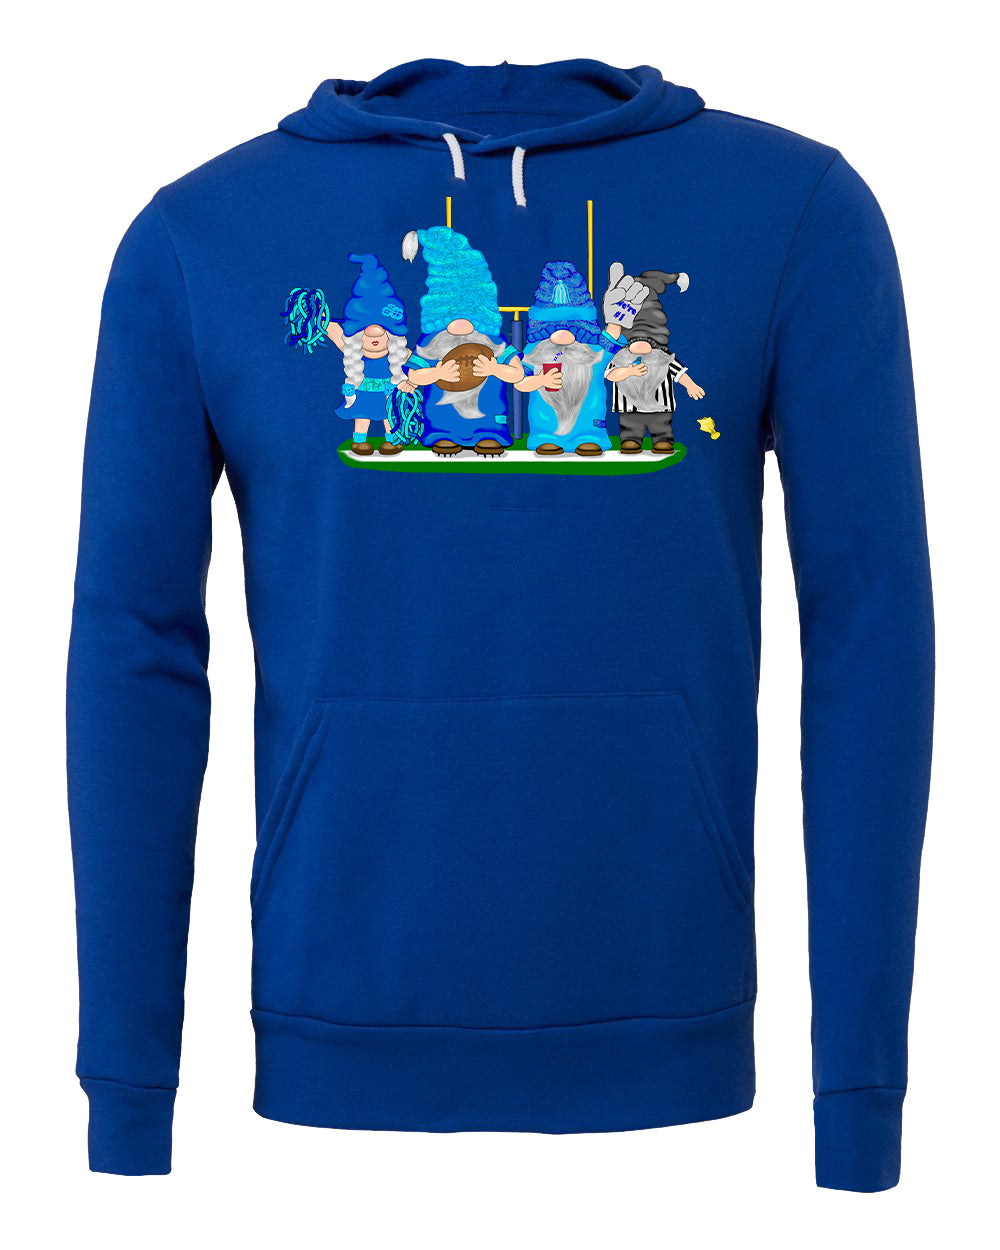 Navy & Blue Football Gnomes (similar to Tennessee) on Unisex Hoodie